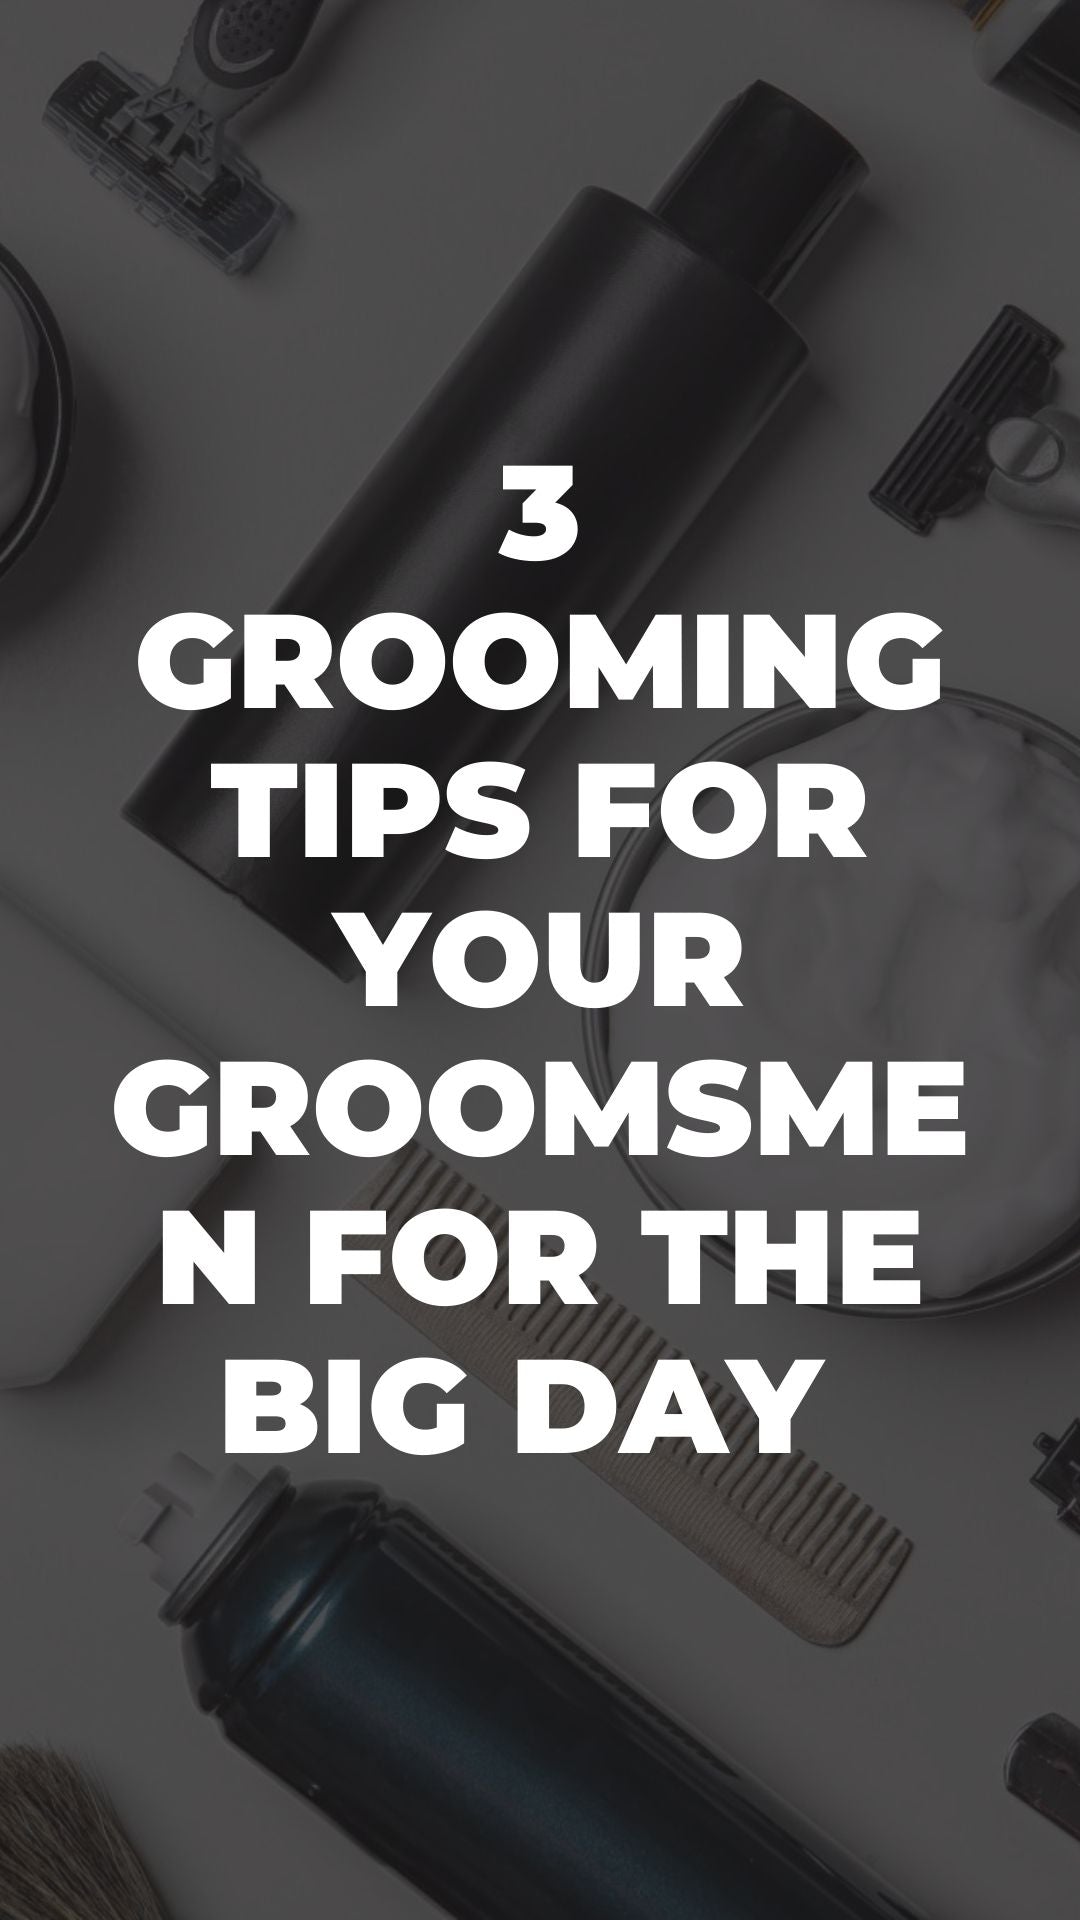 3 Grooming Tips For Your Groomsmen For The Big Day